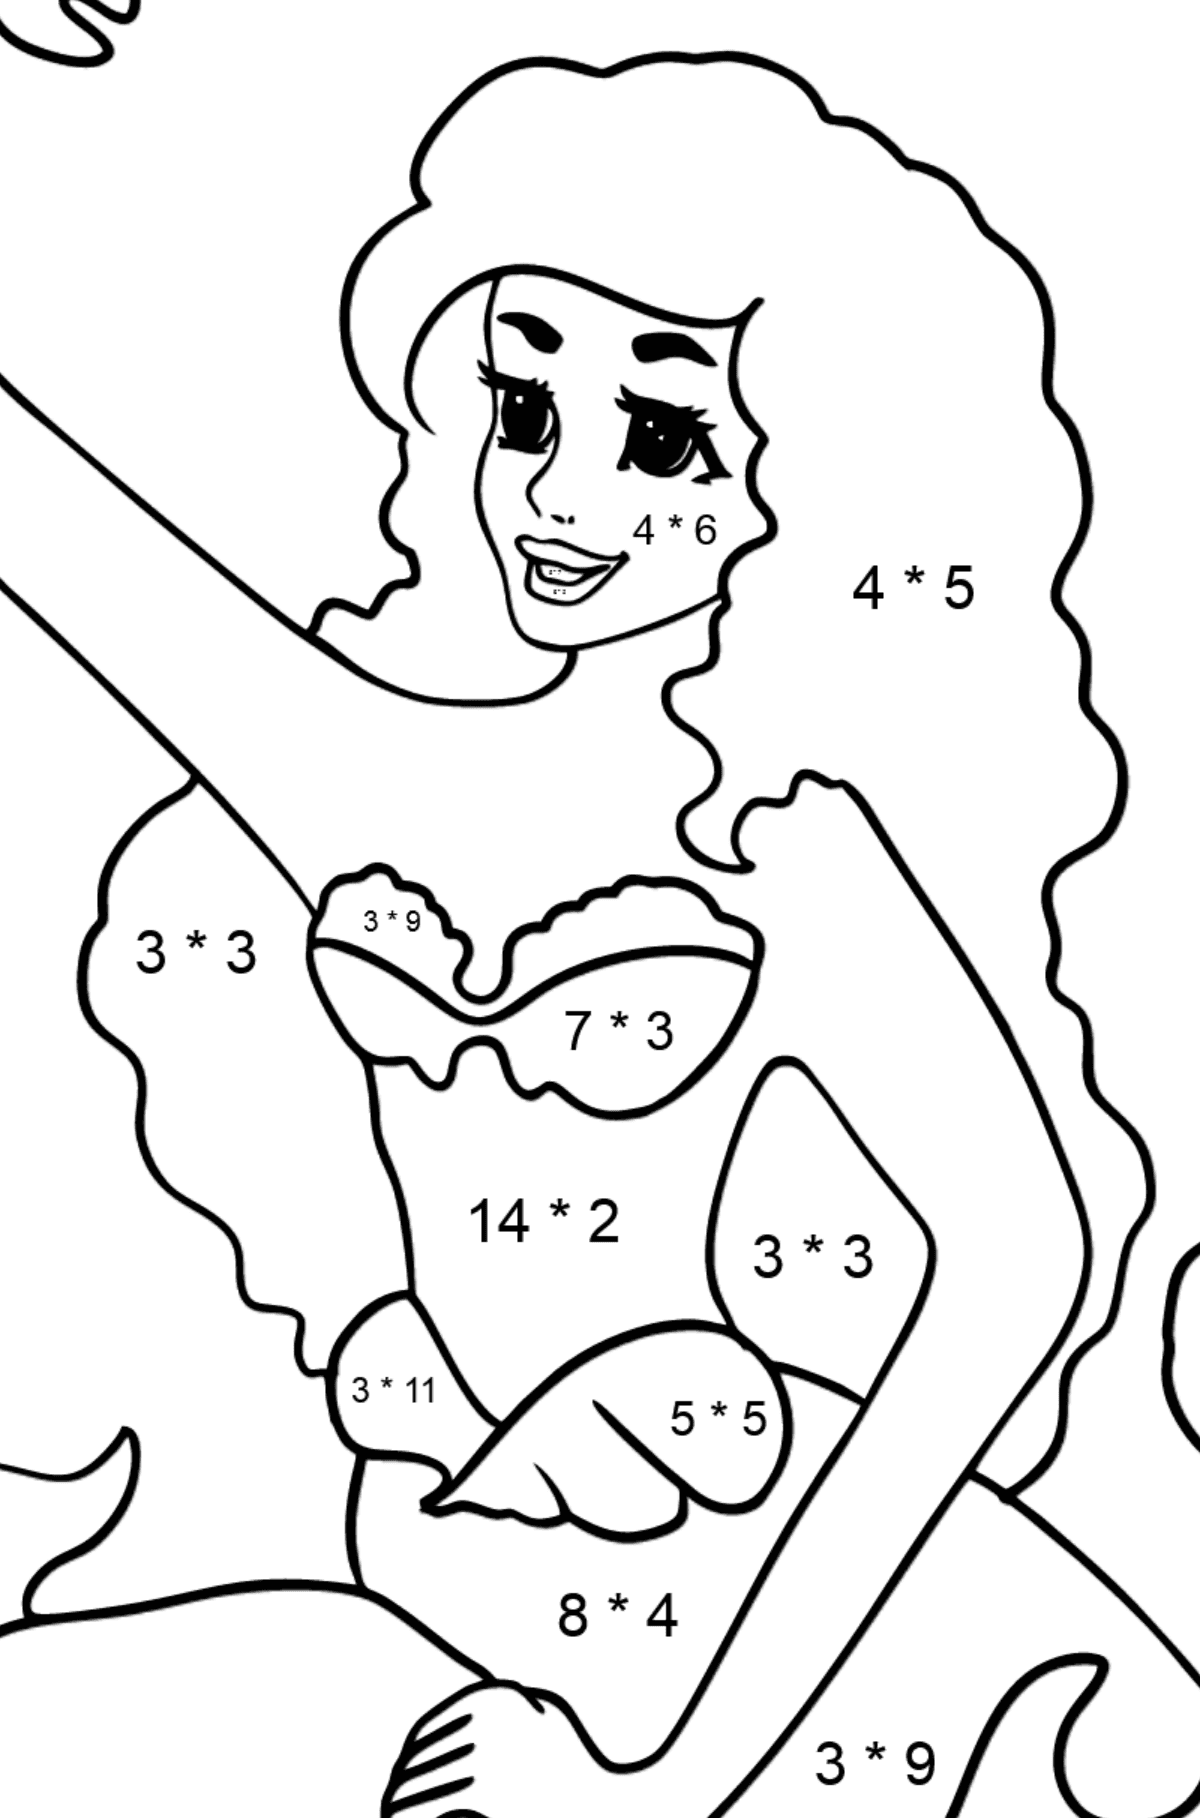 Coloring Page Mermaid and Crab - Math Coloring - Multiplication for Kids